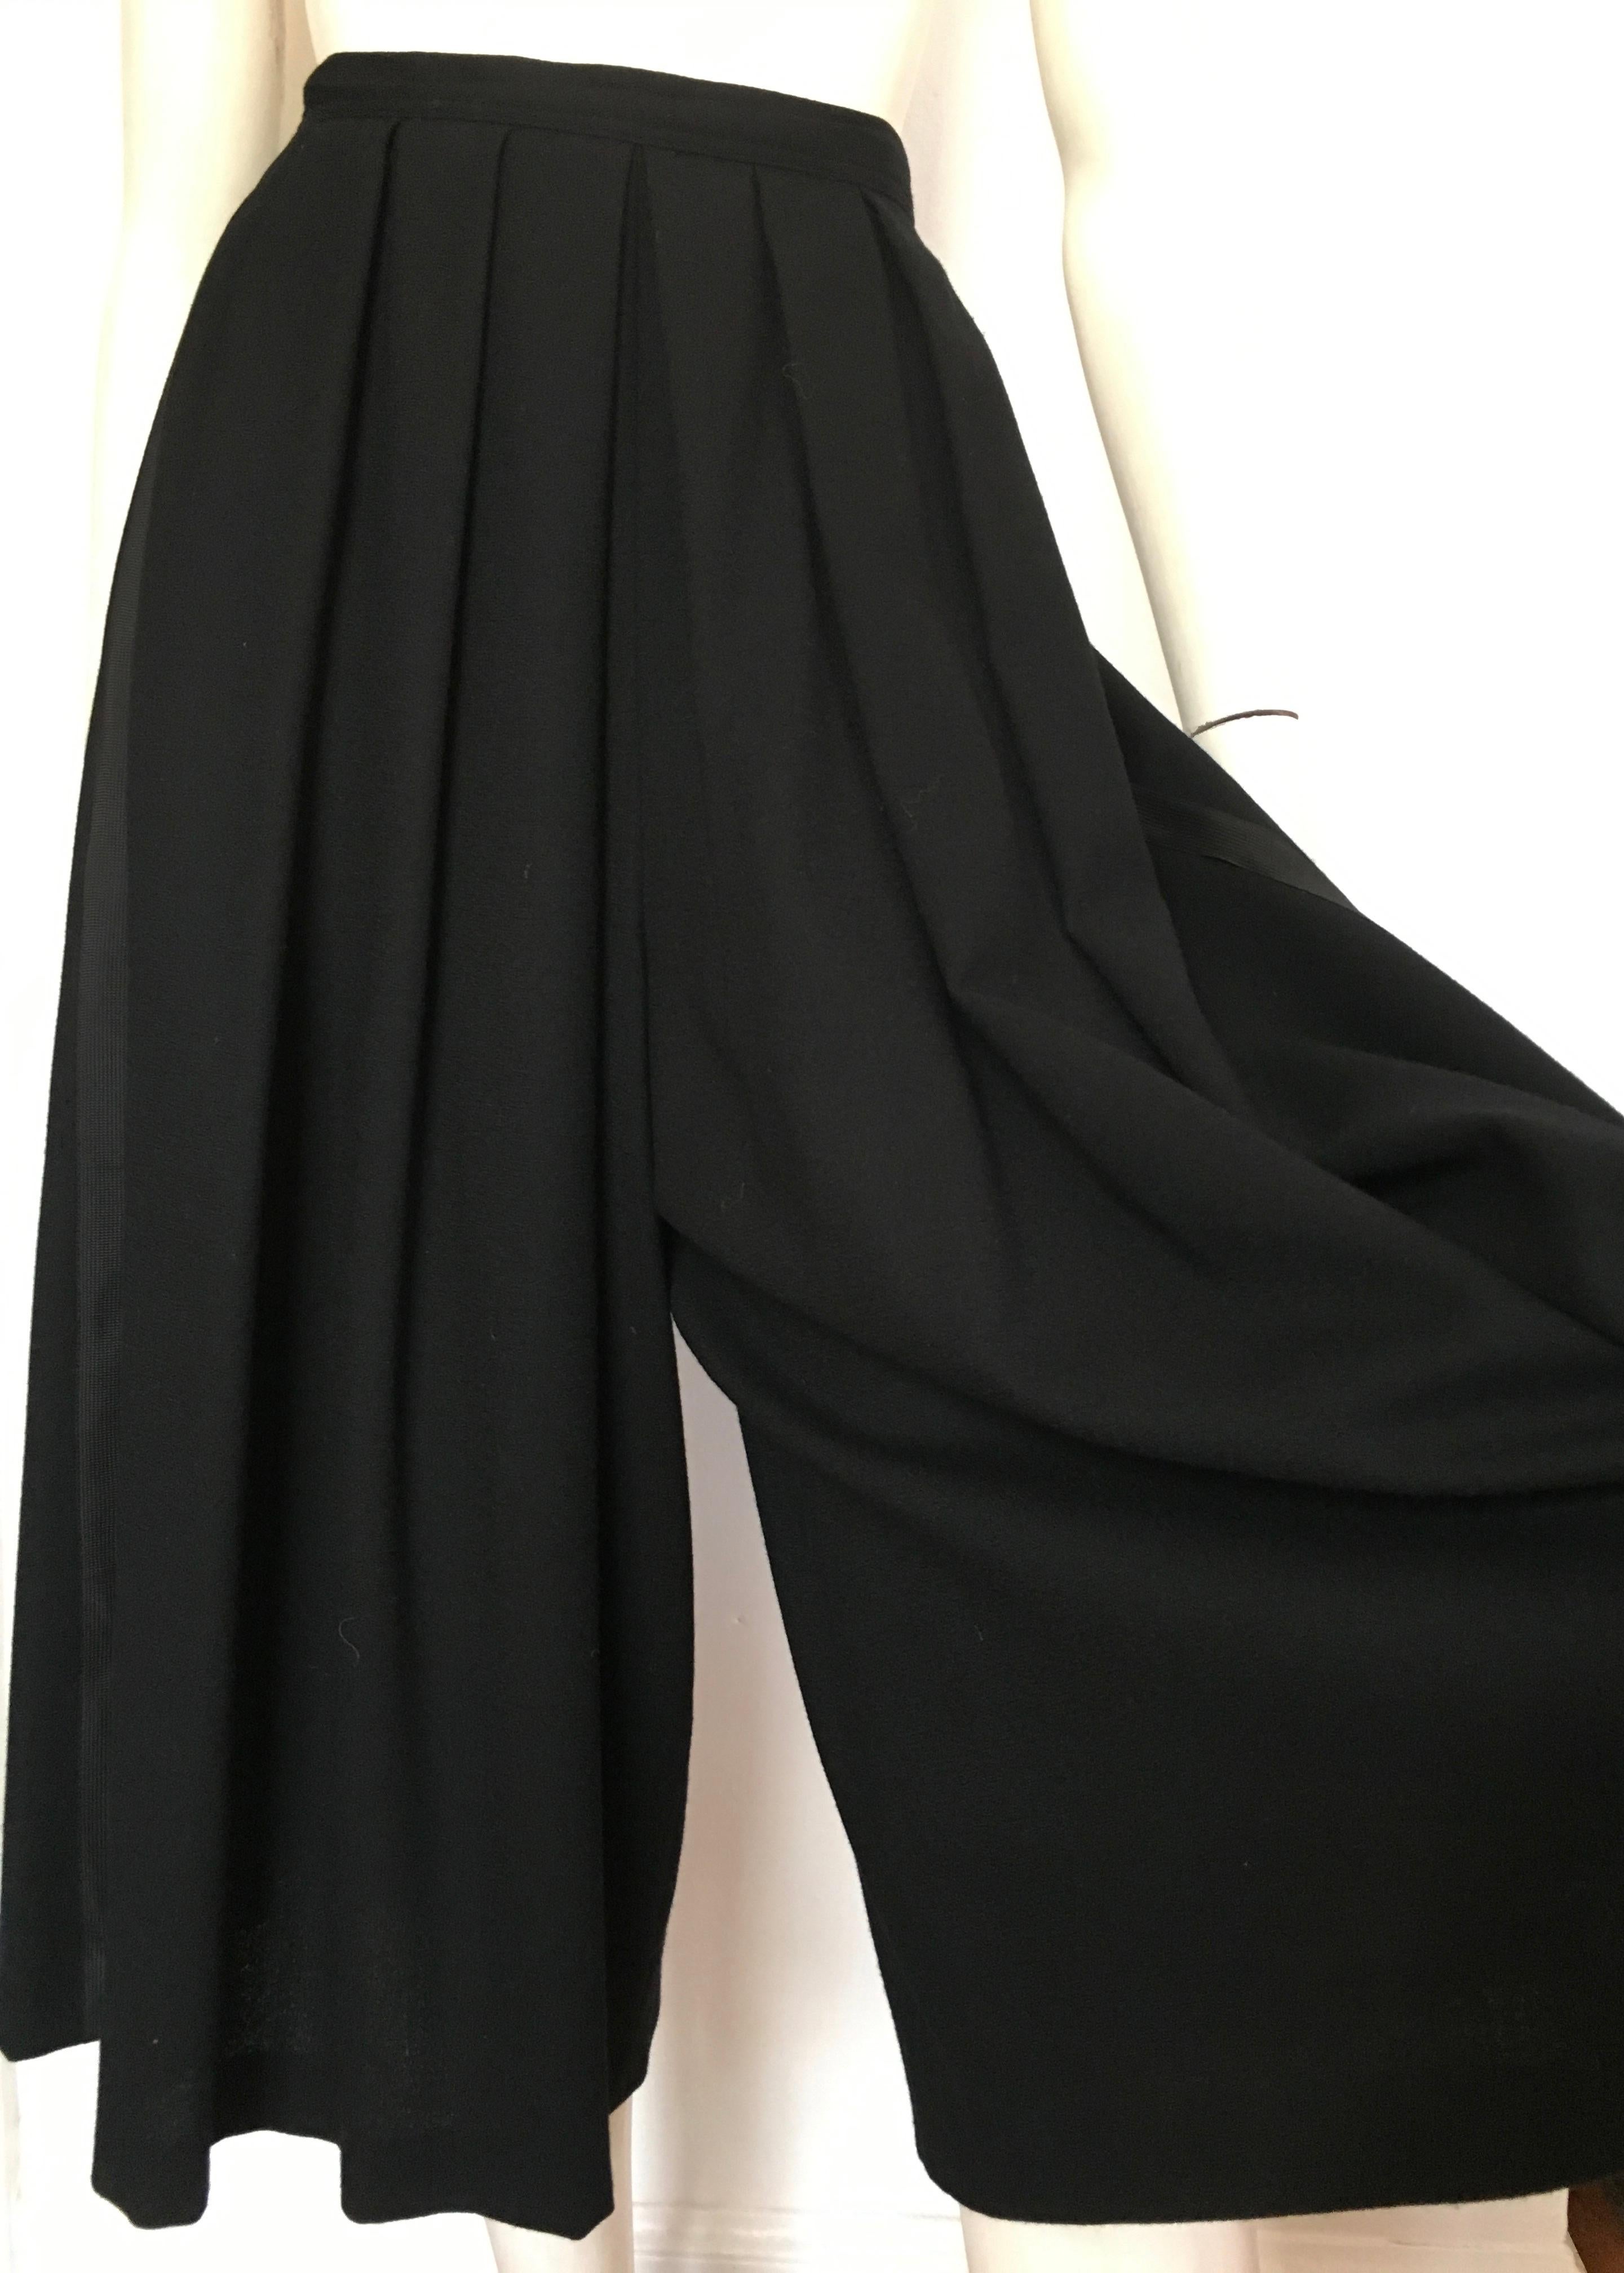 Richard Assatly 1970s Black Wool Pleated Culottes with Pockets Size 6. In Excellent Condition For Sale In Atlanta, GA